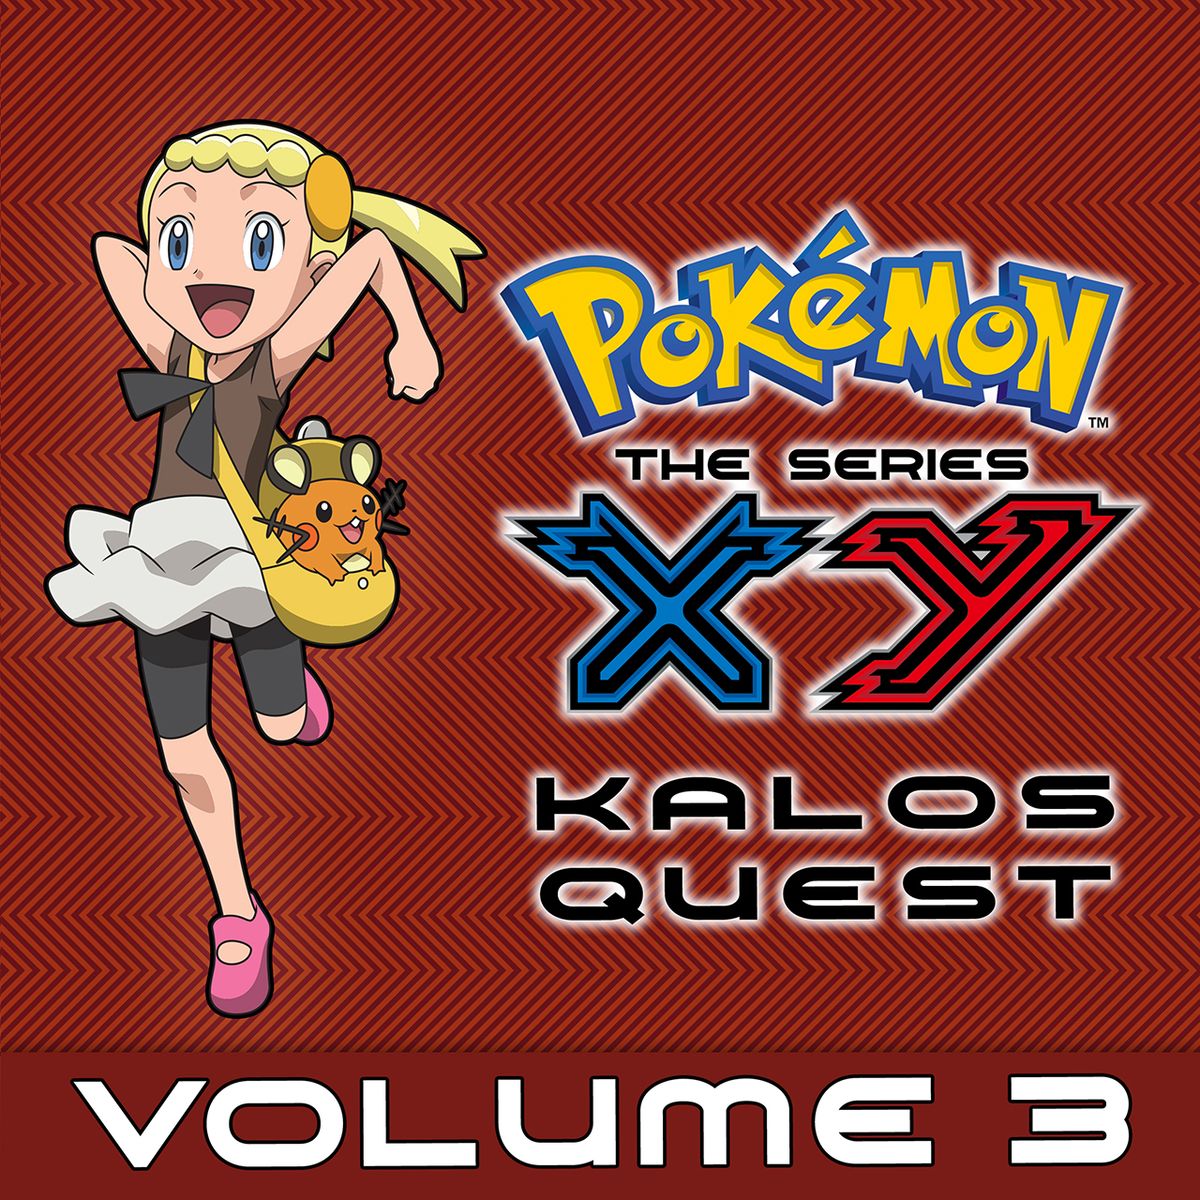 Pok Mon The Series Xy Kalos Quest Vol Is Now Available On Itunes Bulbanews